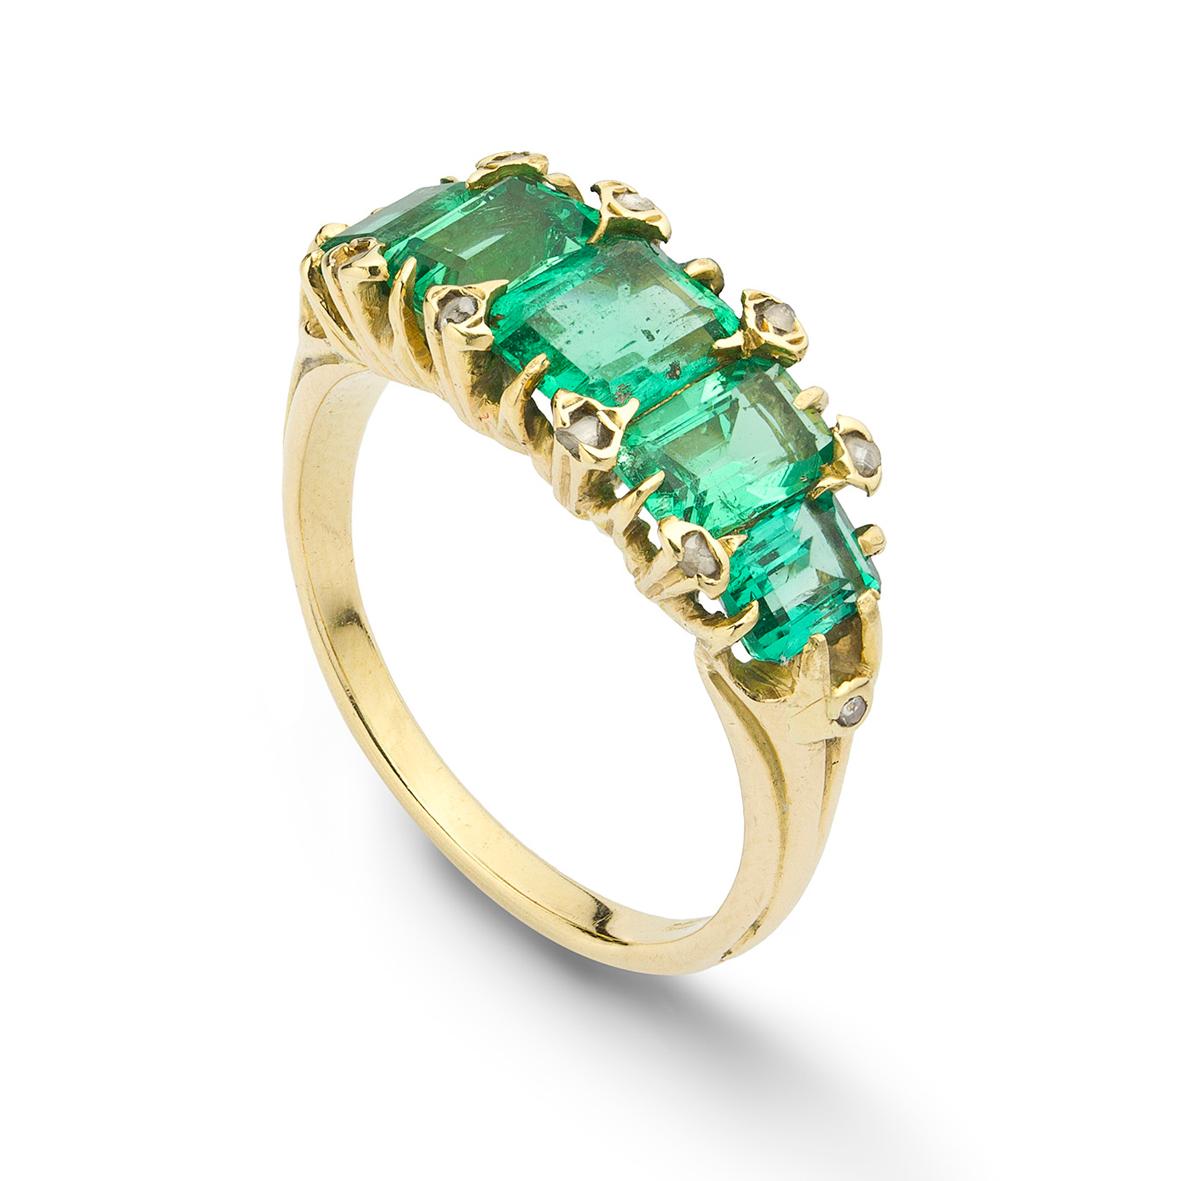 A late Victorian emerald five stone ring, the five emerald-cut emeralds graduated from the centre, estimated to weigh a total of 2.5 carats, claw set with a rose-cut diamonds in between and to the shoulders, all to a 18ct gold mount, cica 1900, head